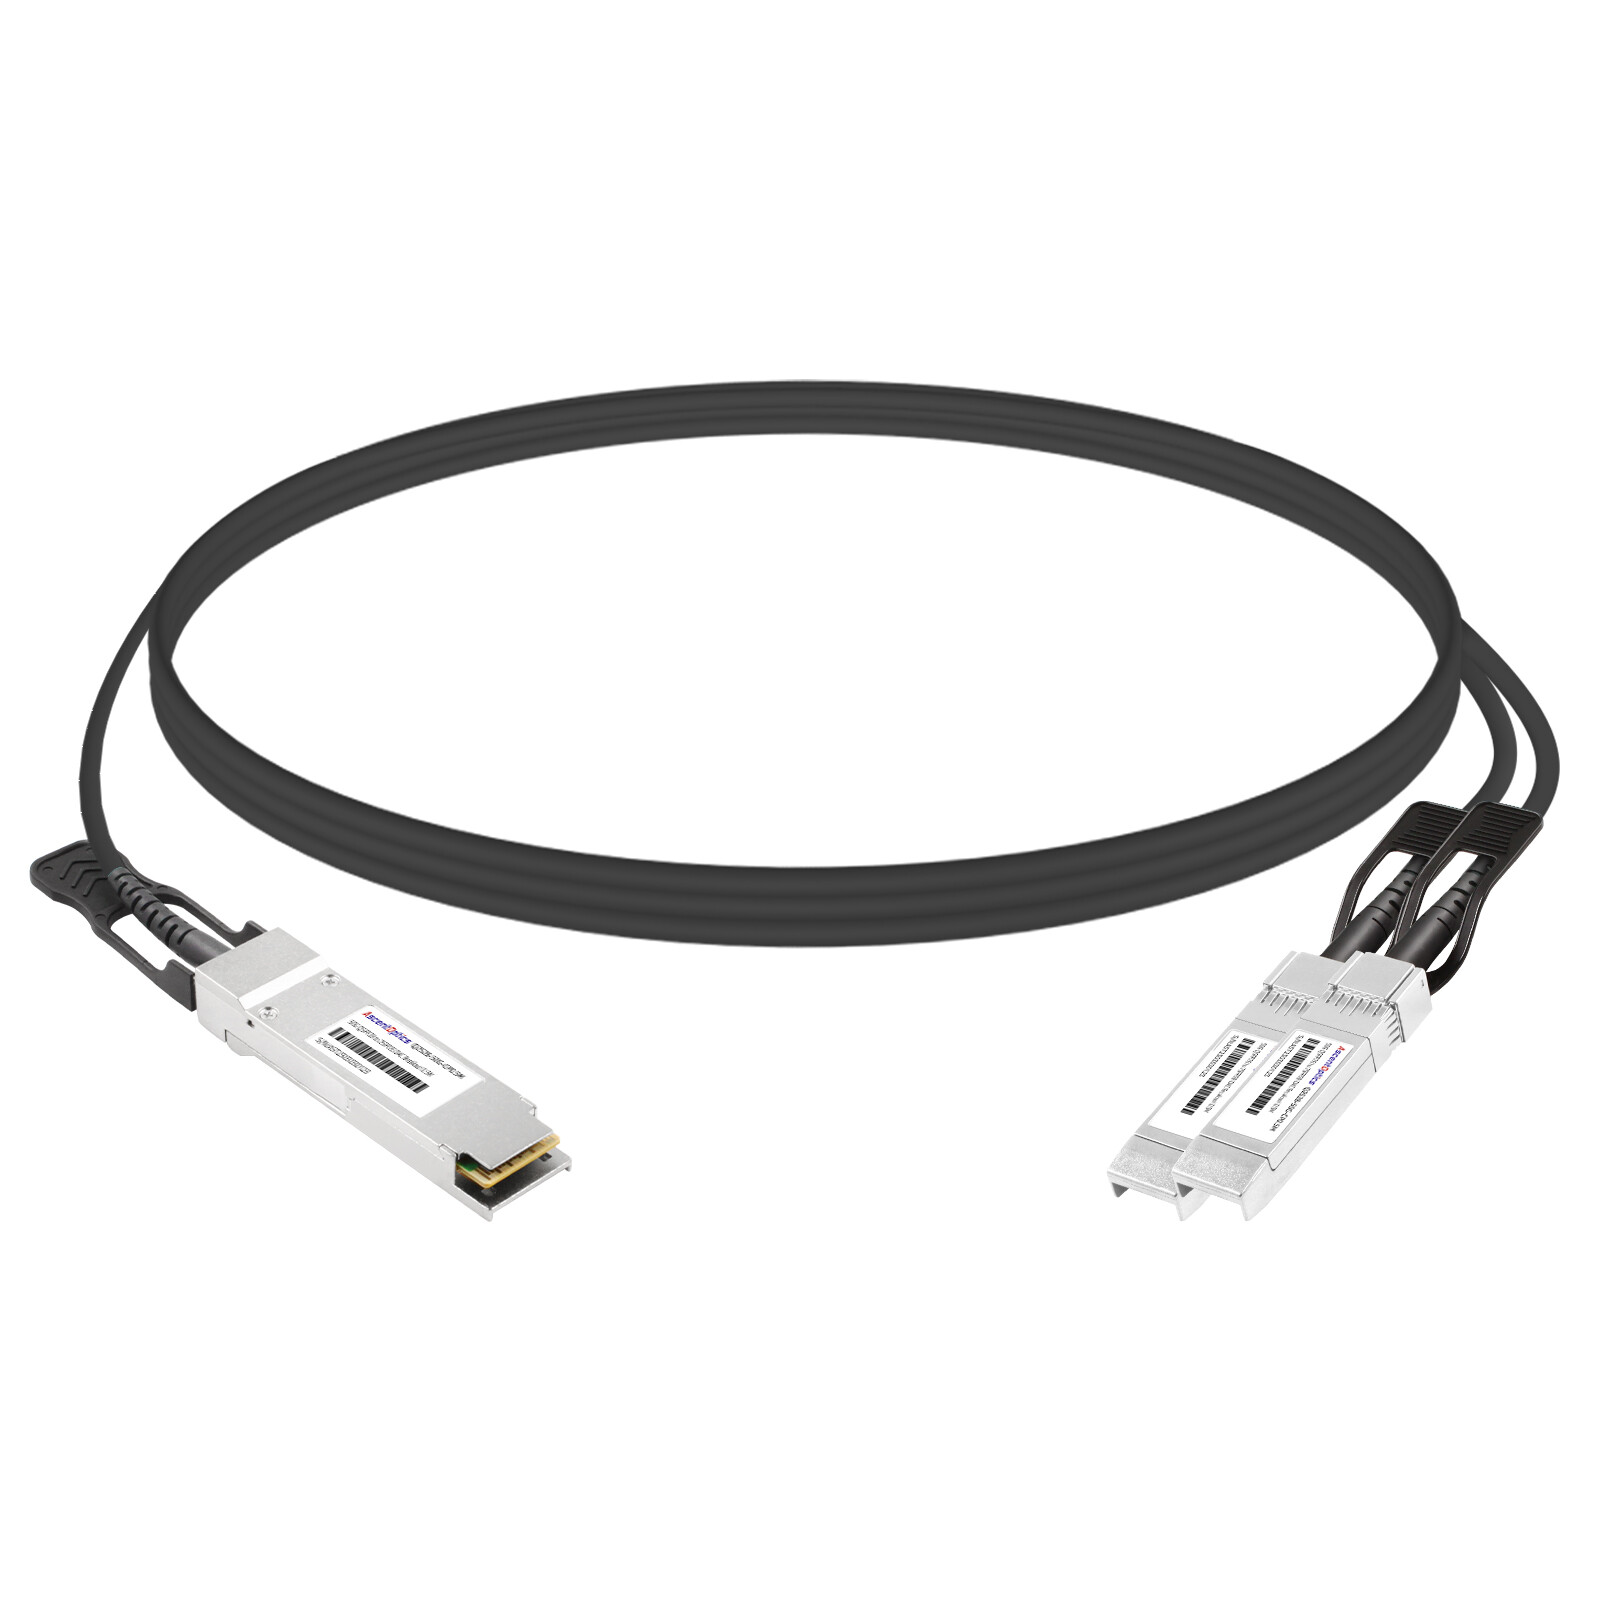 50G DSFP to 2x 25G SFP28 Copper Breakout Cable,4 Meters,Passive